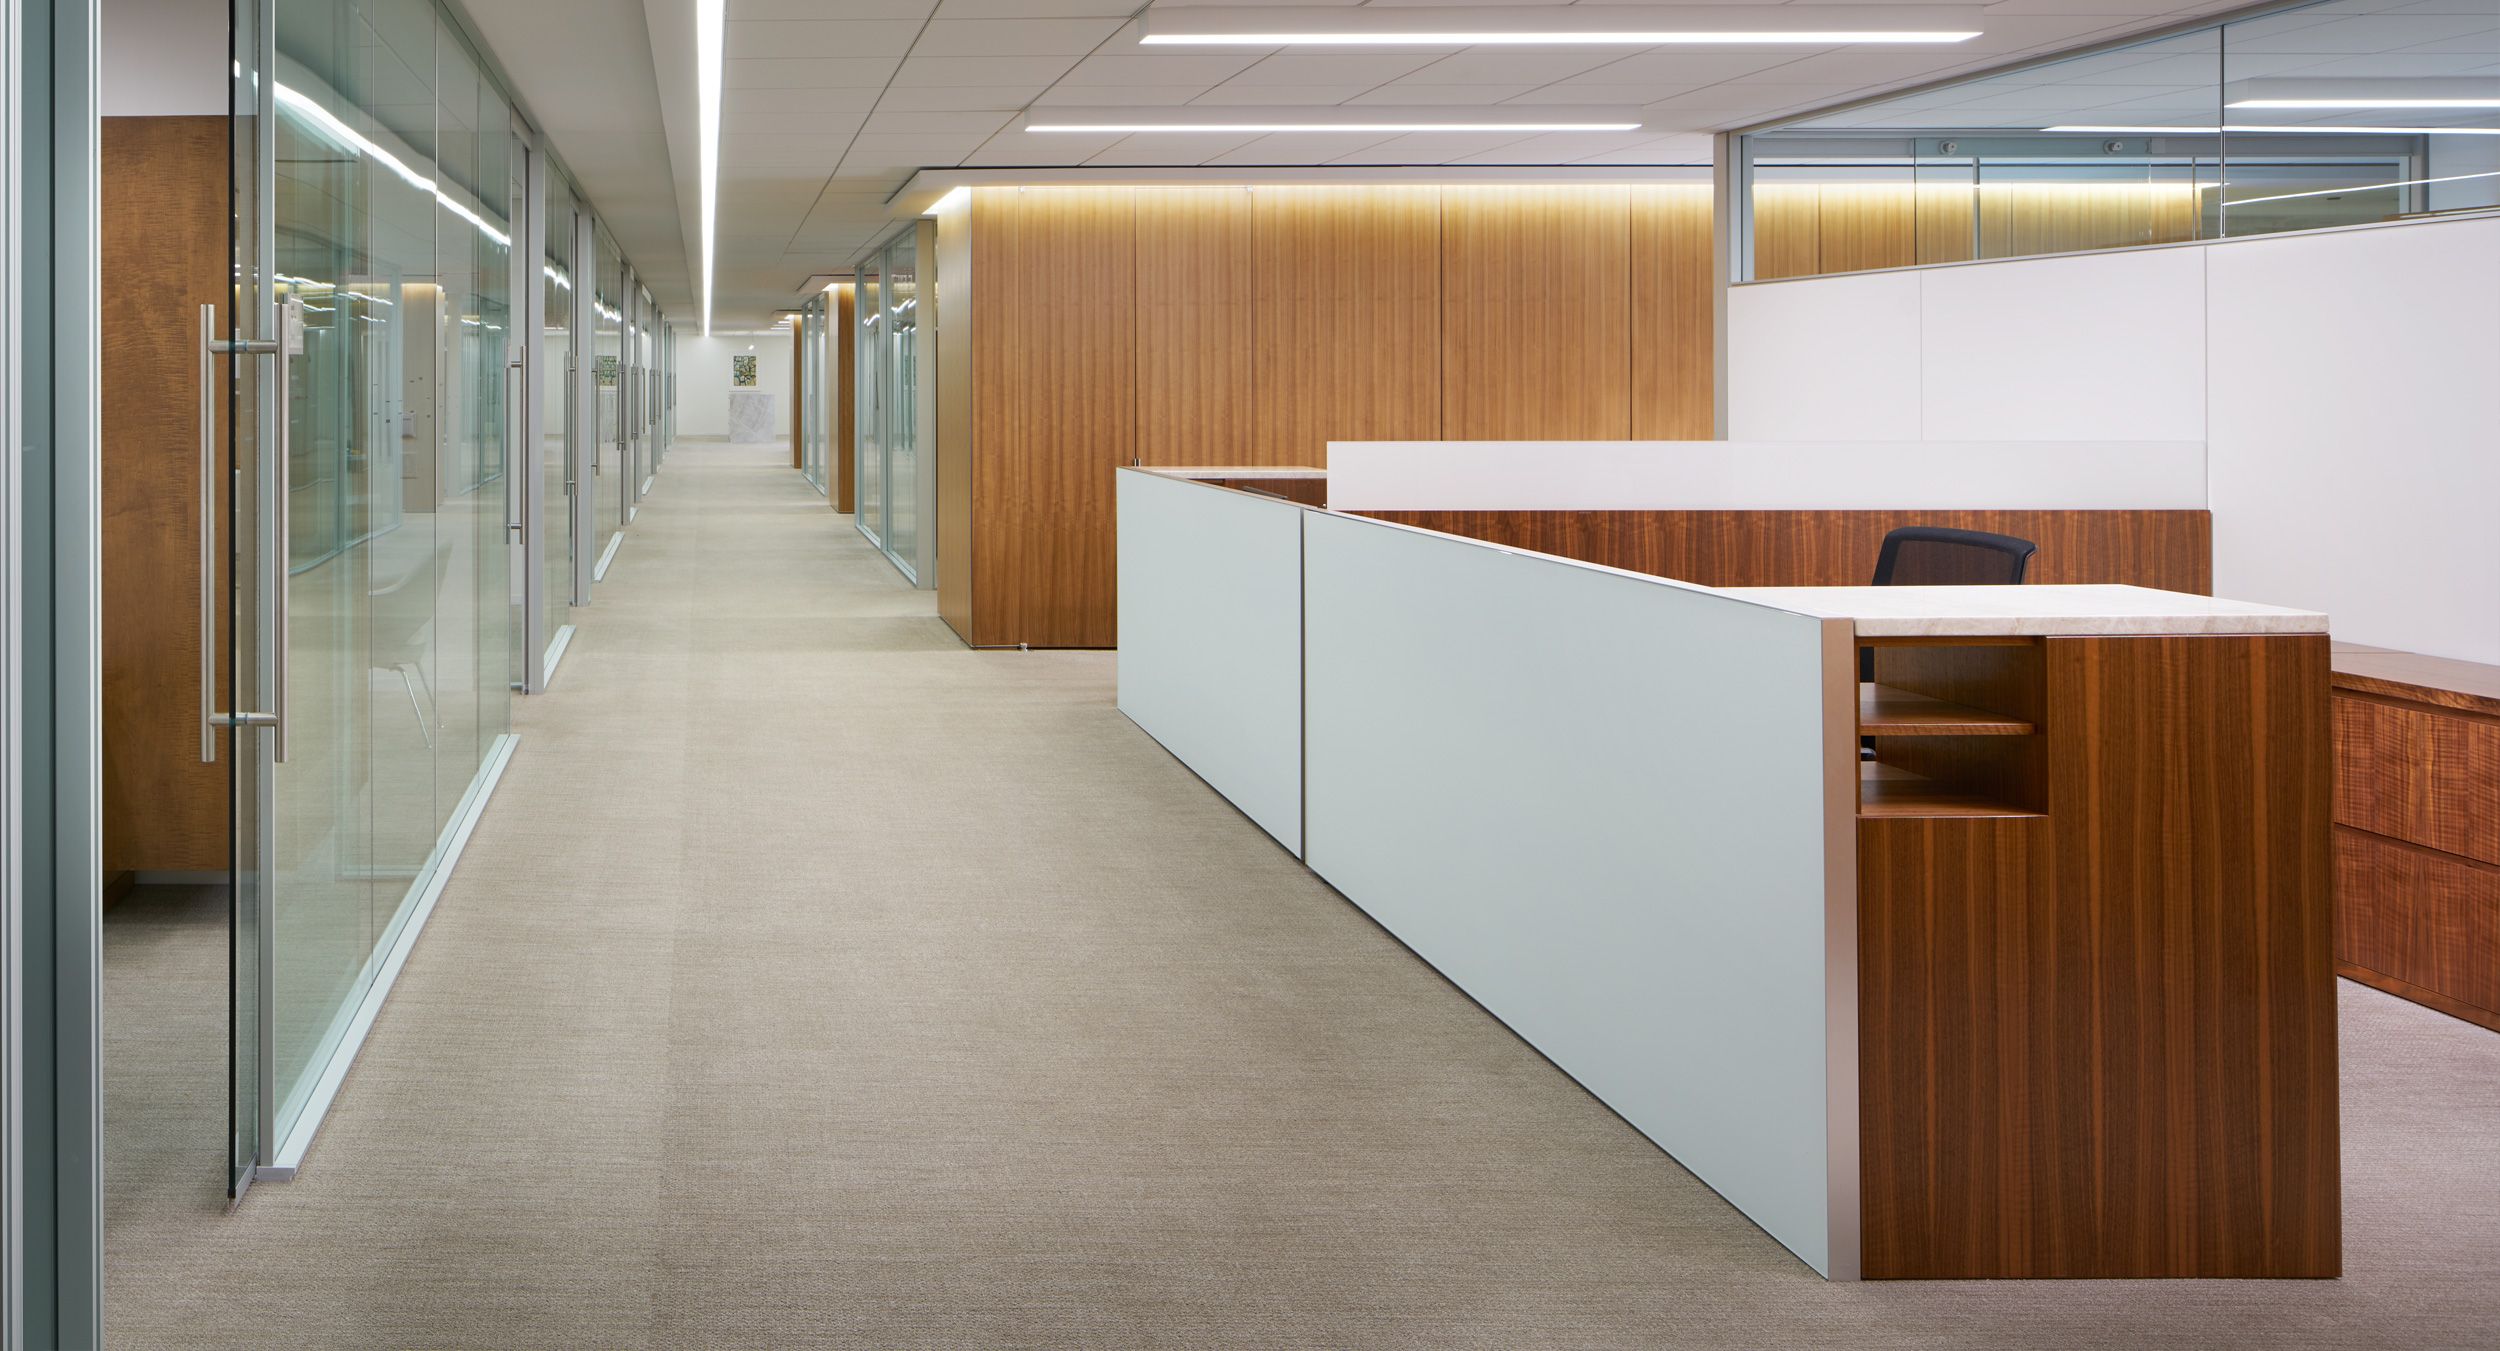 Administrative workstations feature stone, etched glass, and figured walnut veneers.